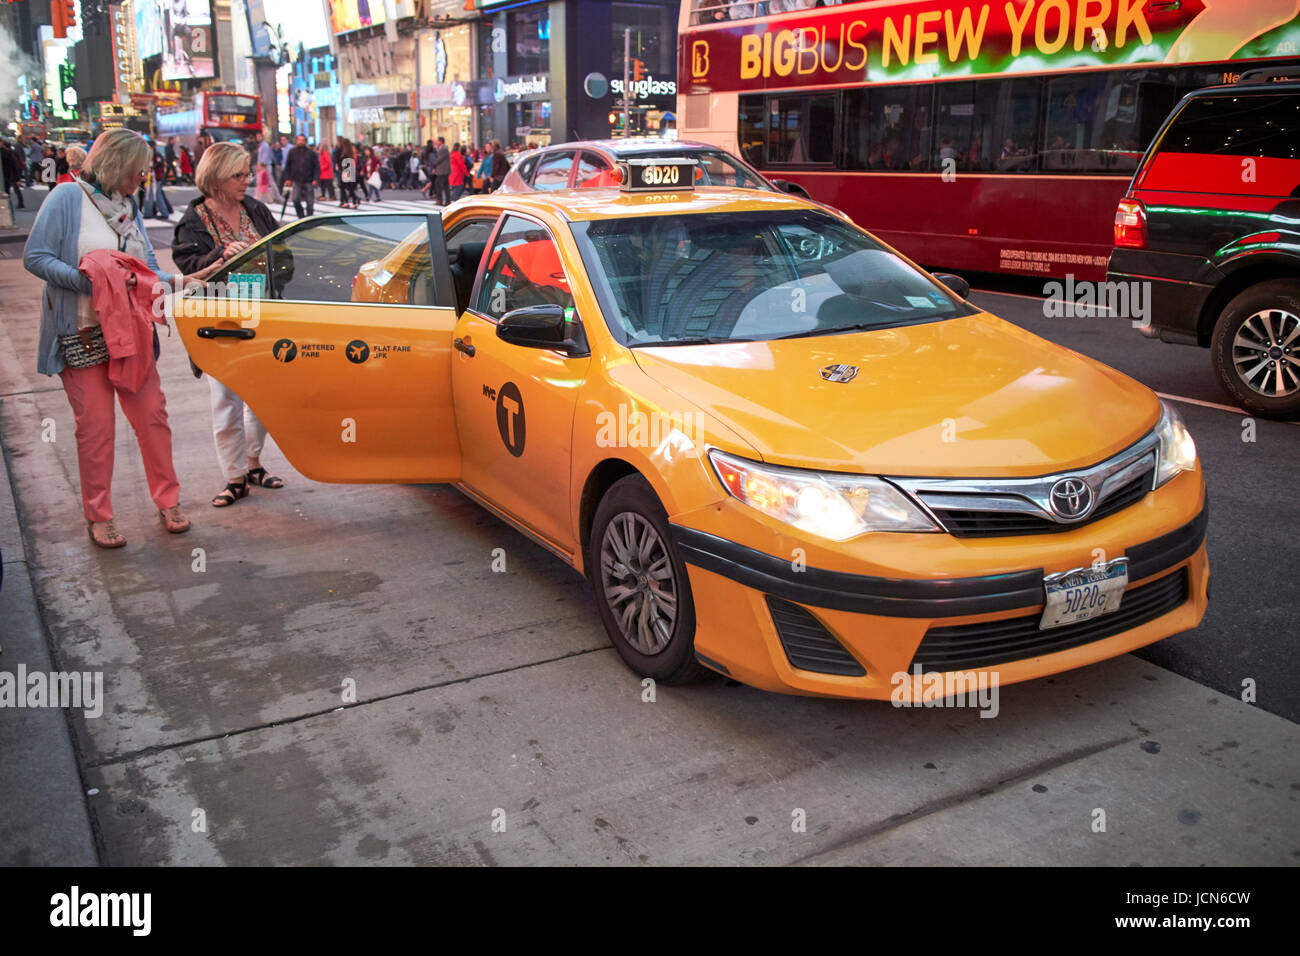 two women getting into a yellow cab in the evening in Times Square New York City USA Stock Photo